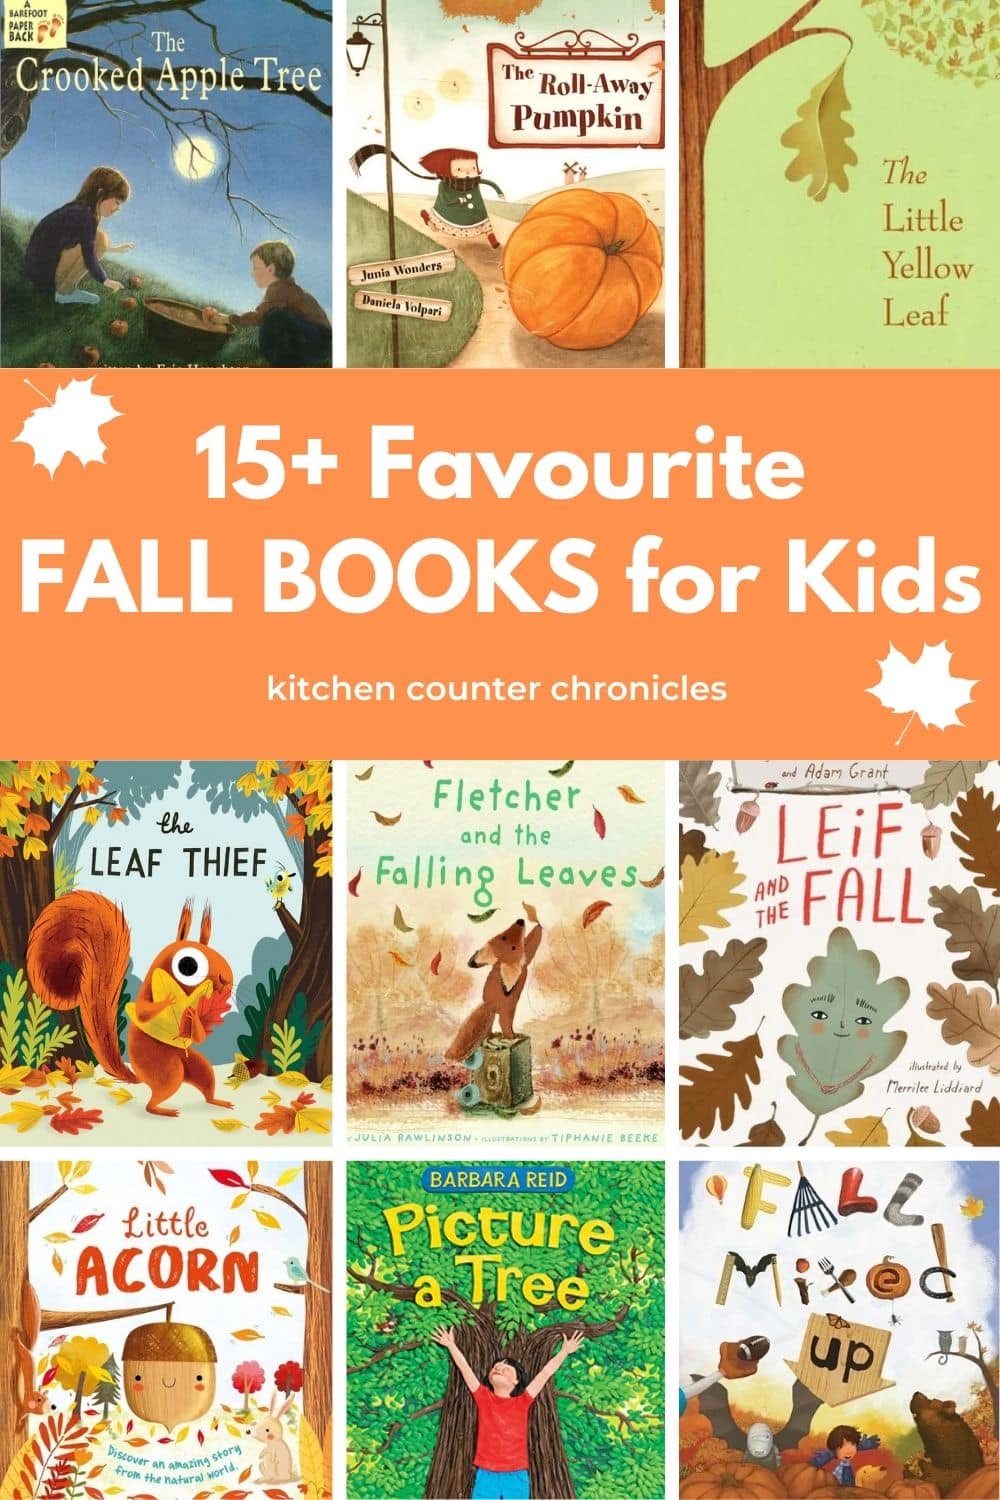 15+ favourite fall books for kids title with 9 book covers